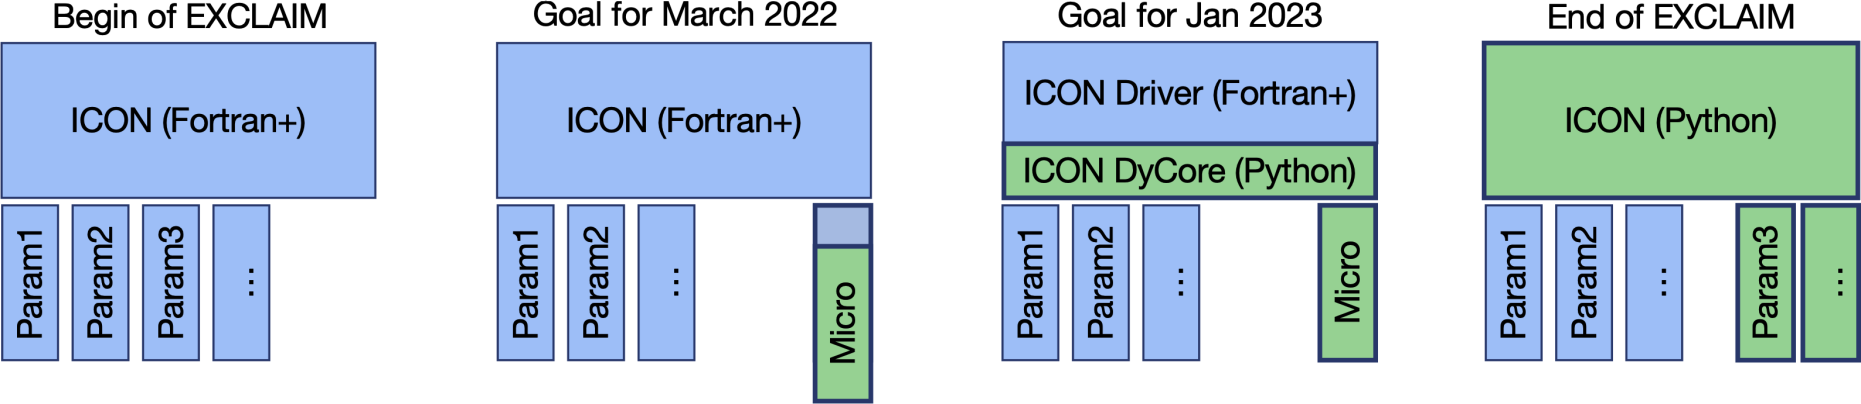 Planned evolution of ICON from Fortran/OpenACC to Python/GT4Py. The steps are: (1) explore the use of Python/GT4Py with one or a few parameterizations; (2) replace the dynamical core of ICON with a Python/GT4Py-based implementation; (3) to make available the whole (or most) of ICON in Python.